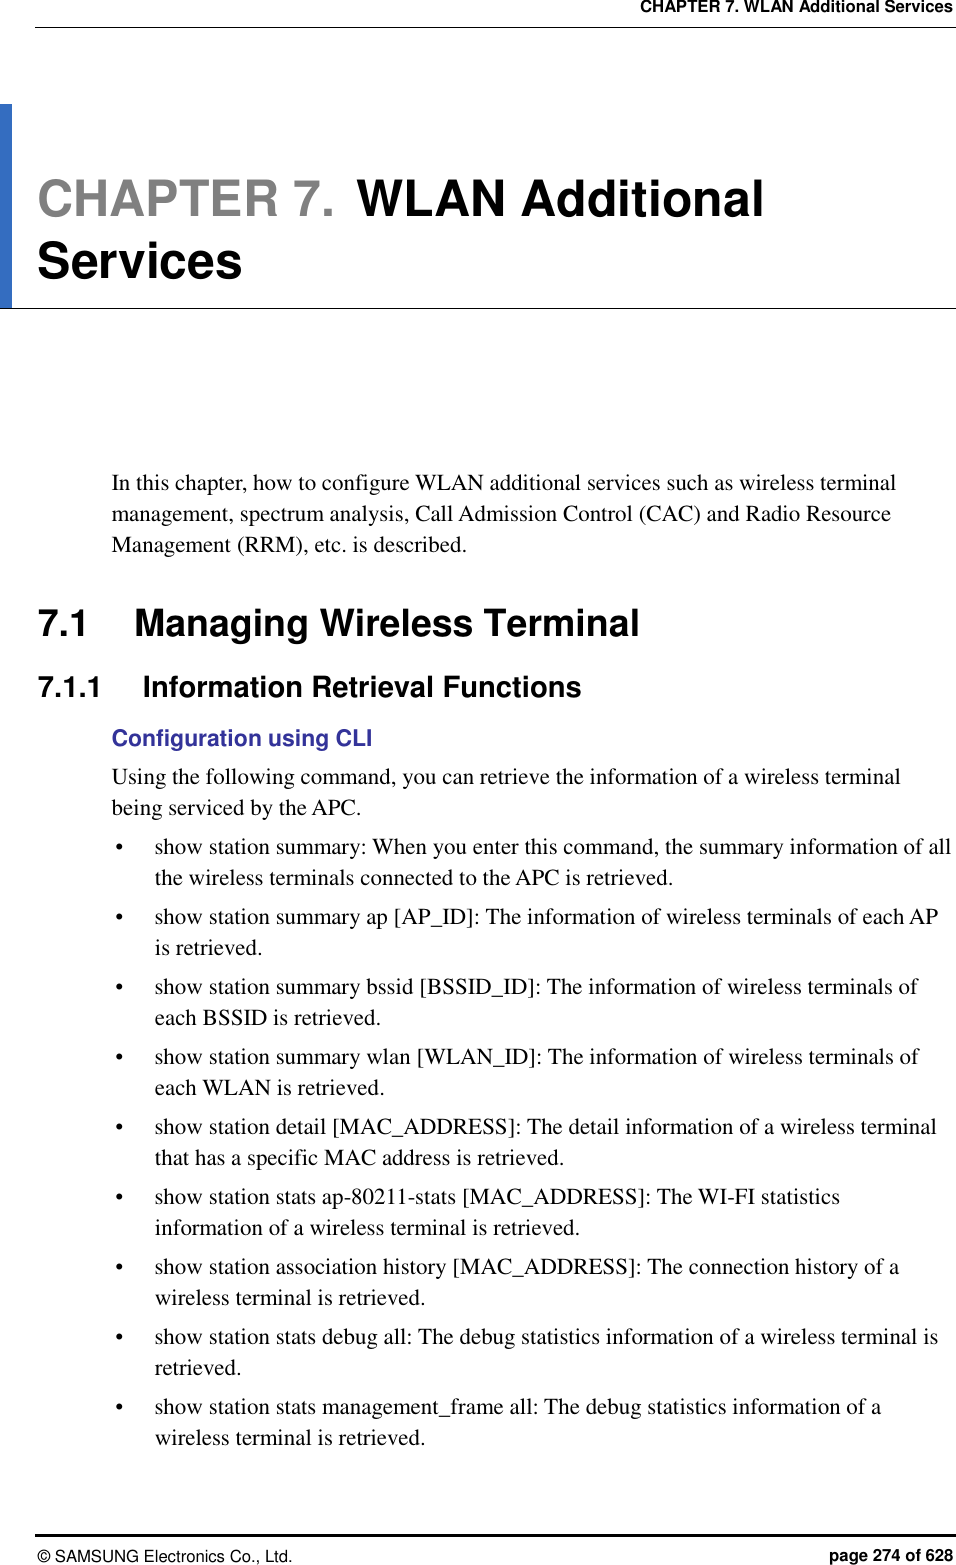 CHAPTER 7. WLAN Additional Services ©  SAMSUNG Electronics Co., Ltd.  page 274 of 628 CHAPTER 7. WLAN Additional Services      In this chapter, how to configure WLAN additional services such as wireless terminal management, spectrum analysis, Call Admission Control (CAC) and Radio Resource Management (RRM), etc. is described.  7.1  Managing Wireless Terminal 7.1.1  Information Retrieval Functions Configuration using CLI Using the following command, you can retrieve the information of a wireless terminal being serviced by the APC.  show station summary: When you enter this command, the summary information of all the wireless terminals connected to the APC is retrieved.  show station summary ap [AP_ID]: The information of wireless terminals of each AP is retrieved.  show station summary bssid [BSSID_ID]: The information of wireless terminals of each BSSID is retrieved.  show station summary wlan [WLAN_ID]: The information of wireless terminals of each WLAN is retrieved.  show station detail [MAC_ADDRESS]: The detail information of a wireless terminal that has a specific MAC address is retrieved.  show station stats ap-80211-stats [MAC_ADDRESS]: The WI-FI statistics information of a wireless terminal is retrieved.    show station association history [MAC_ADDRESS]: The connection history of a wireless terminal is retrieved.  show station stats debug all: The debug statistics information of a wireless terminal is retrieved.  show station stats management_frame all: The debug statistics information of a wireless terminal is retrieved.  